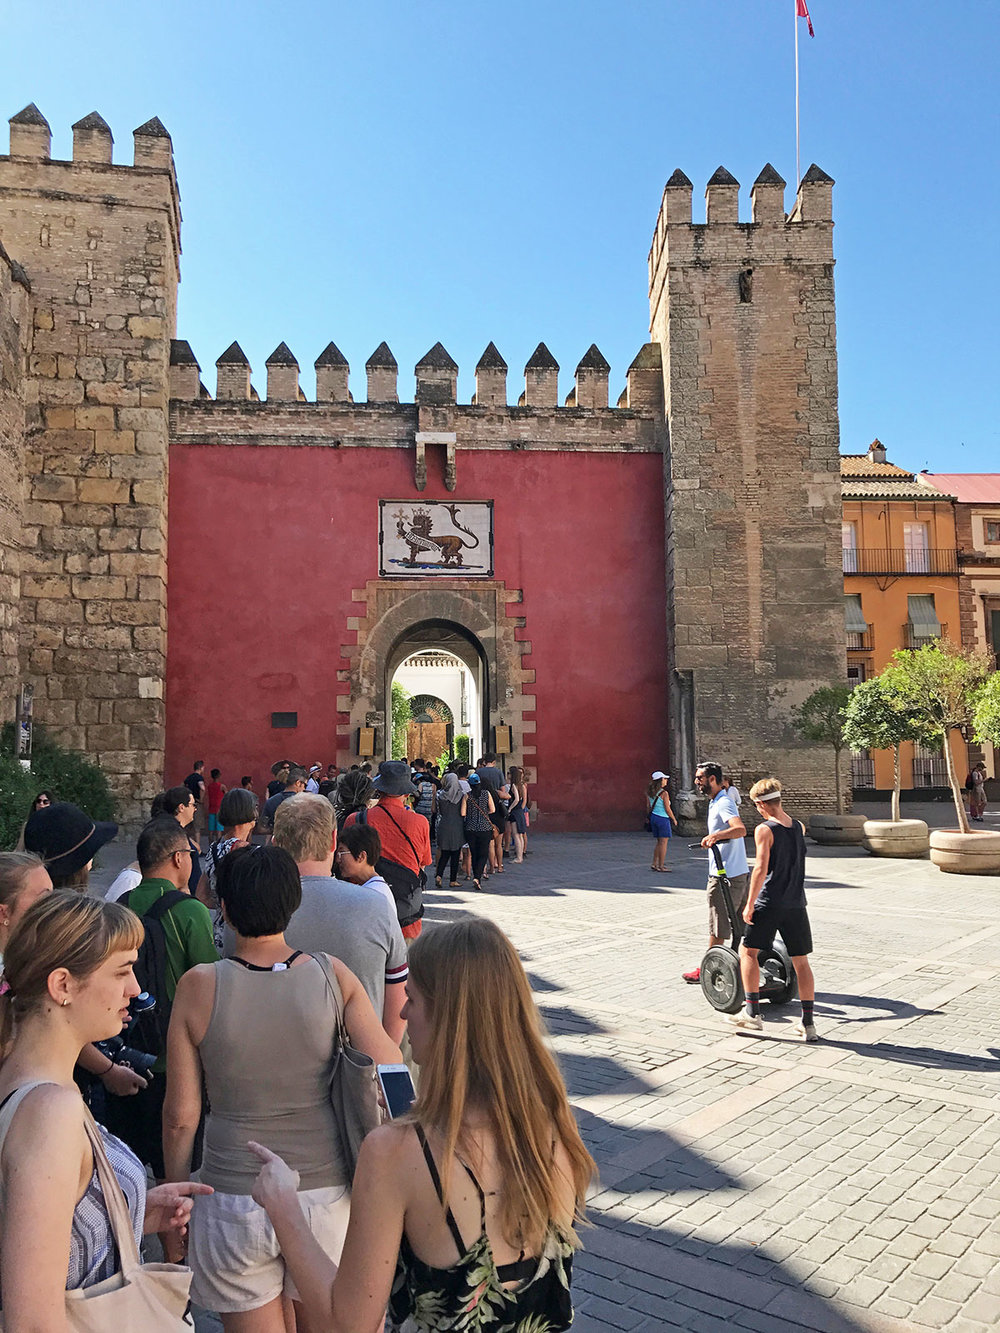 The entrance to the Alcázar, and the long line of summer visitors